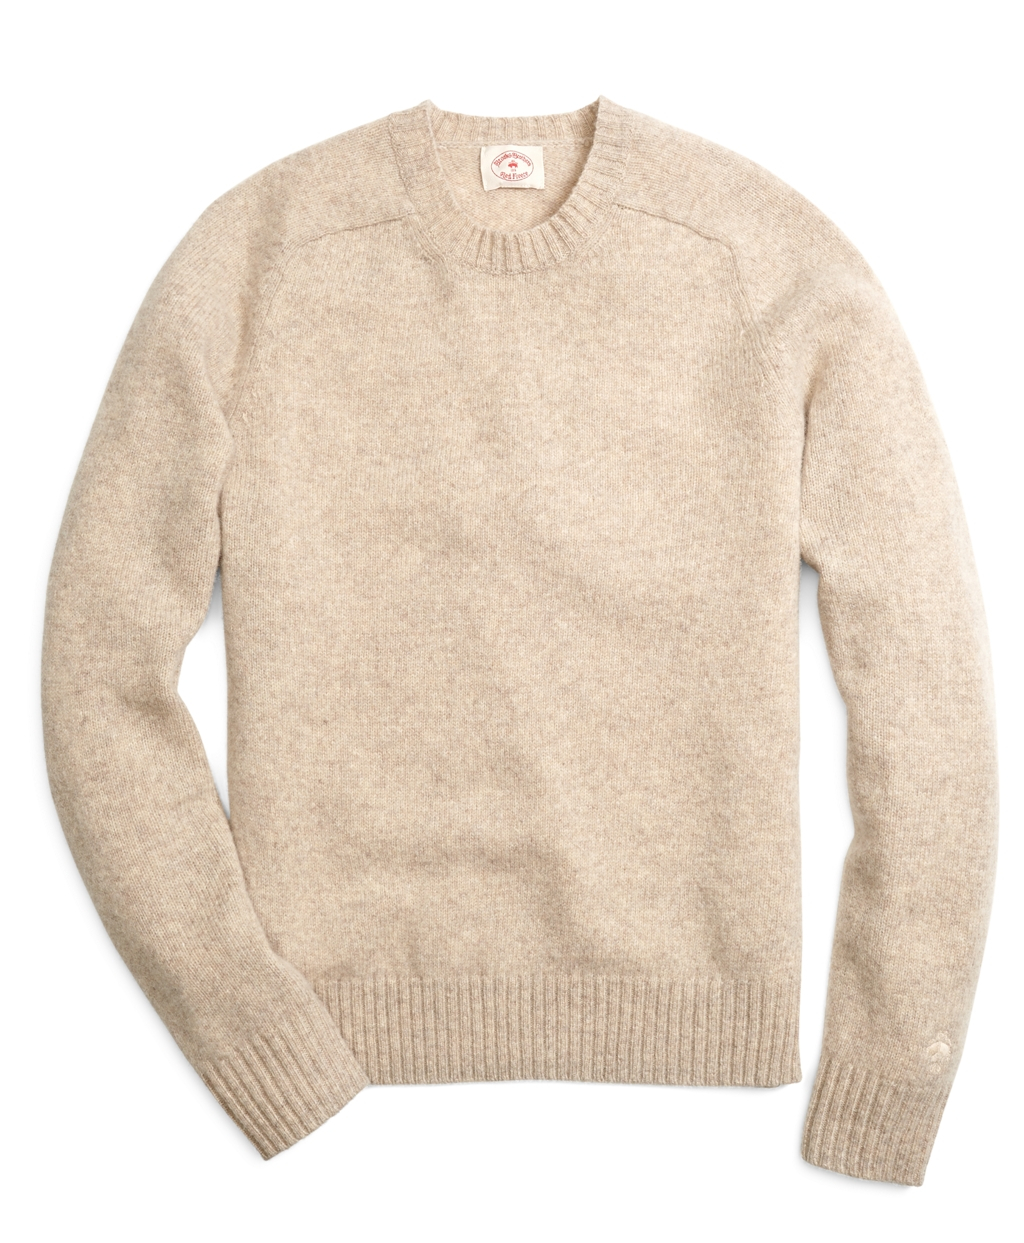 Lyst - Brooks Brothers Shetland Crewneck Sweater in Natural for Men